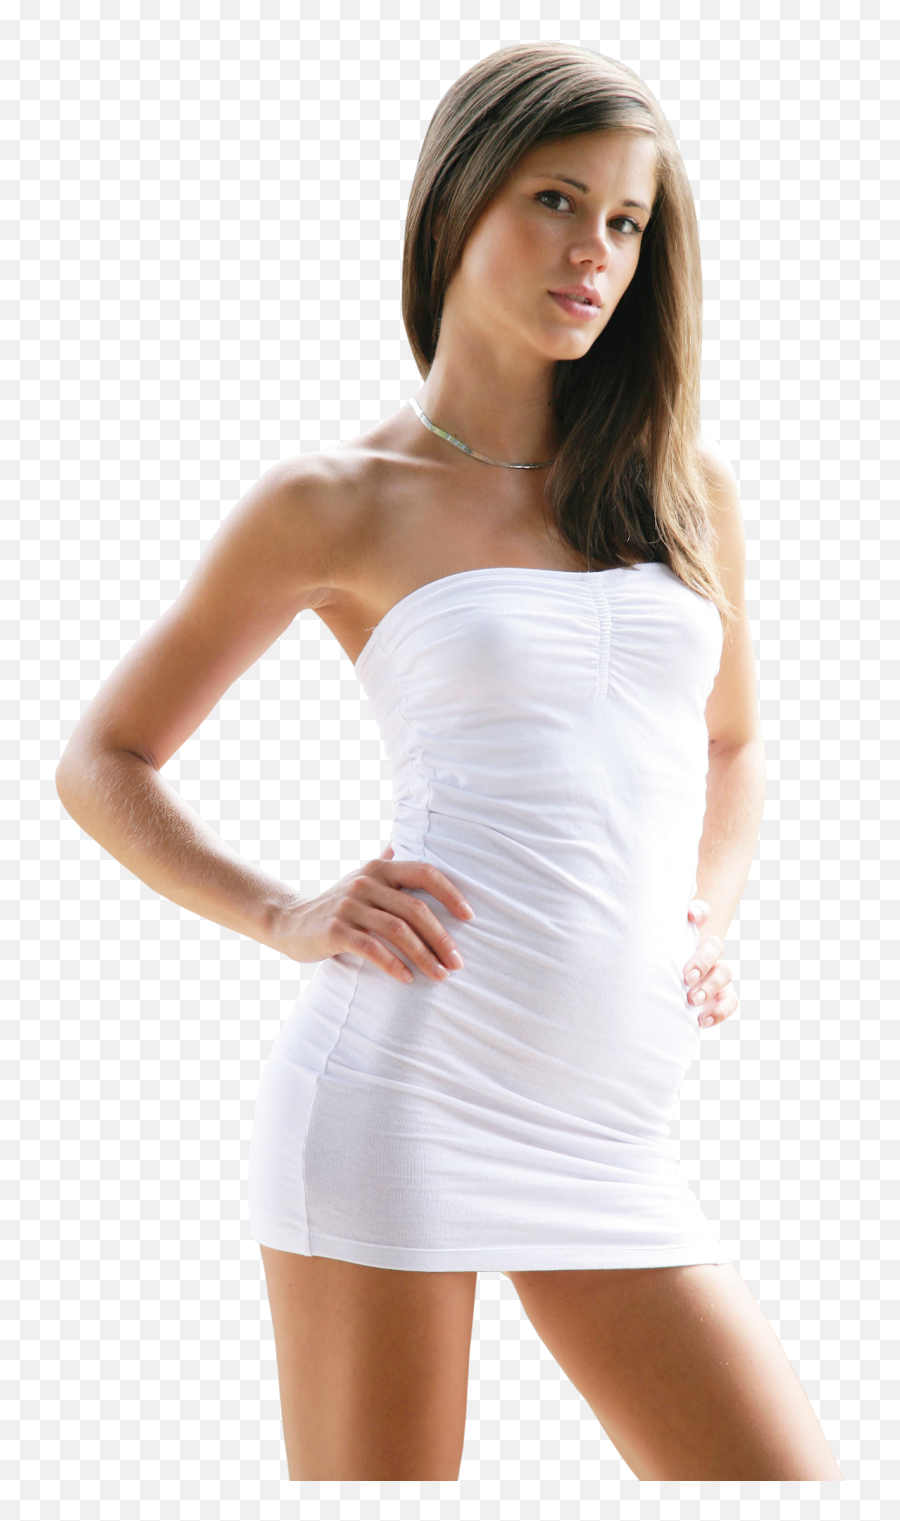 Little Caprice In White Dress Png Image - Little Caprice,White Dress Png